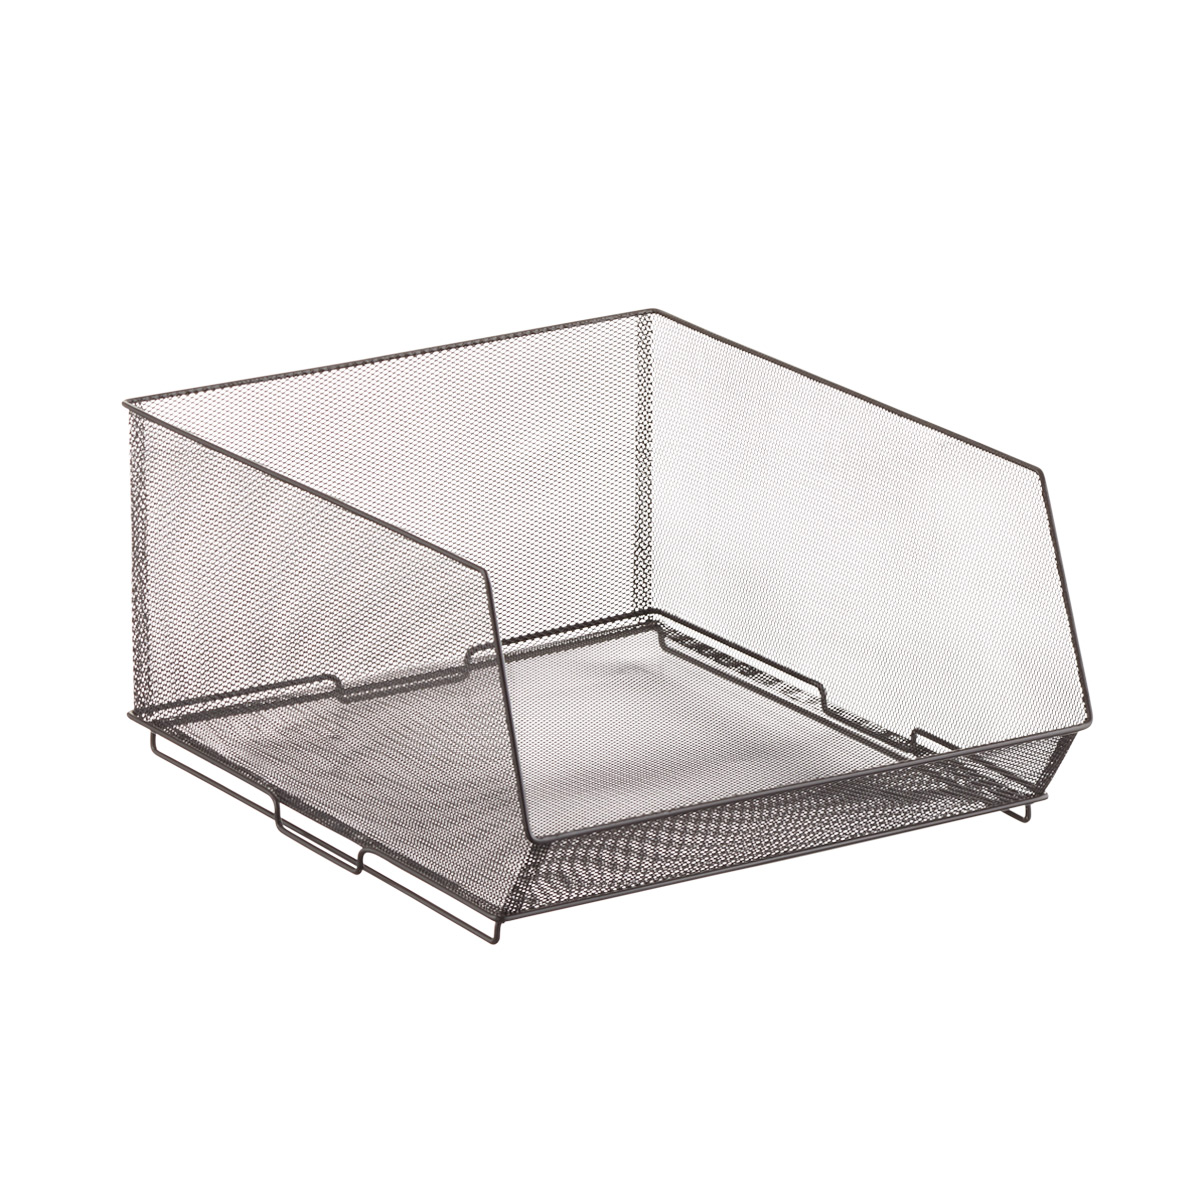 https://www.containerstore.com/catalogimages/476049/10090640-large-open-front-mesh-bin-g.jpg